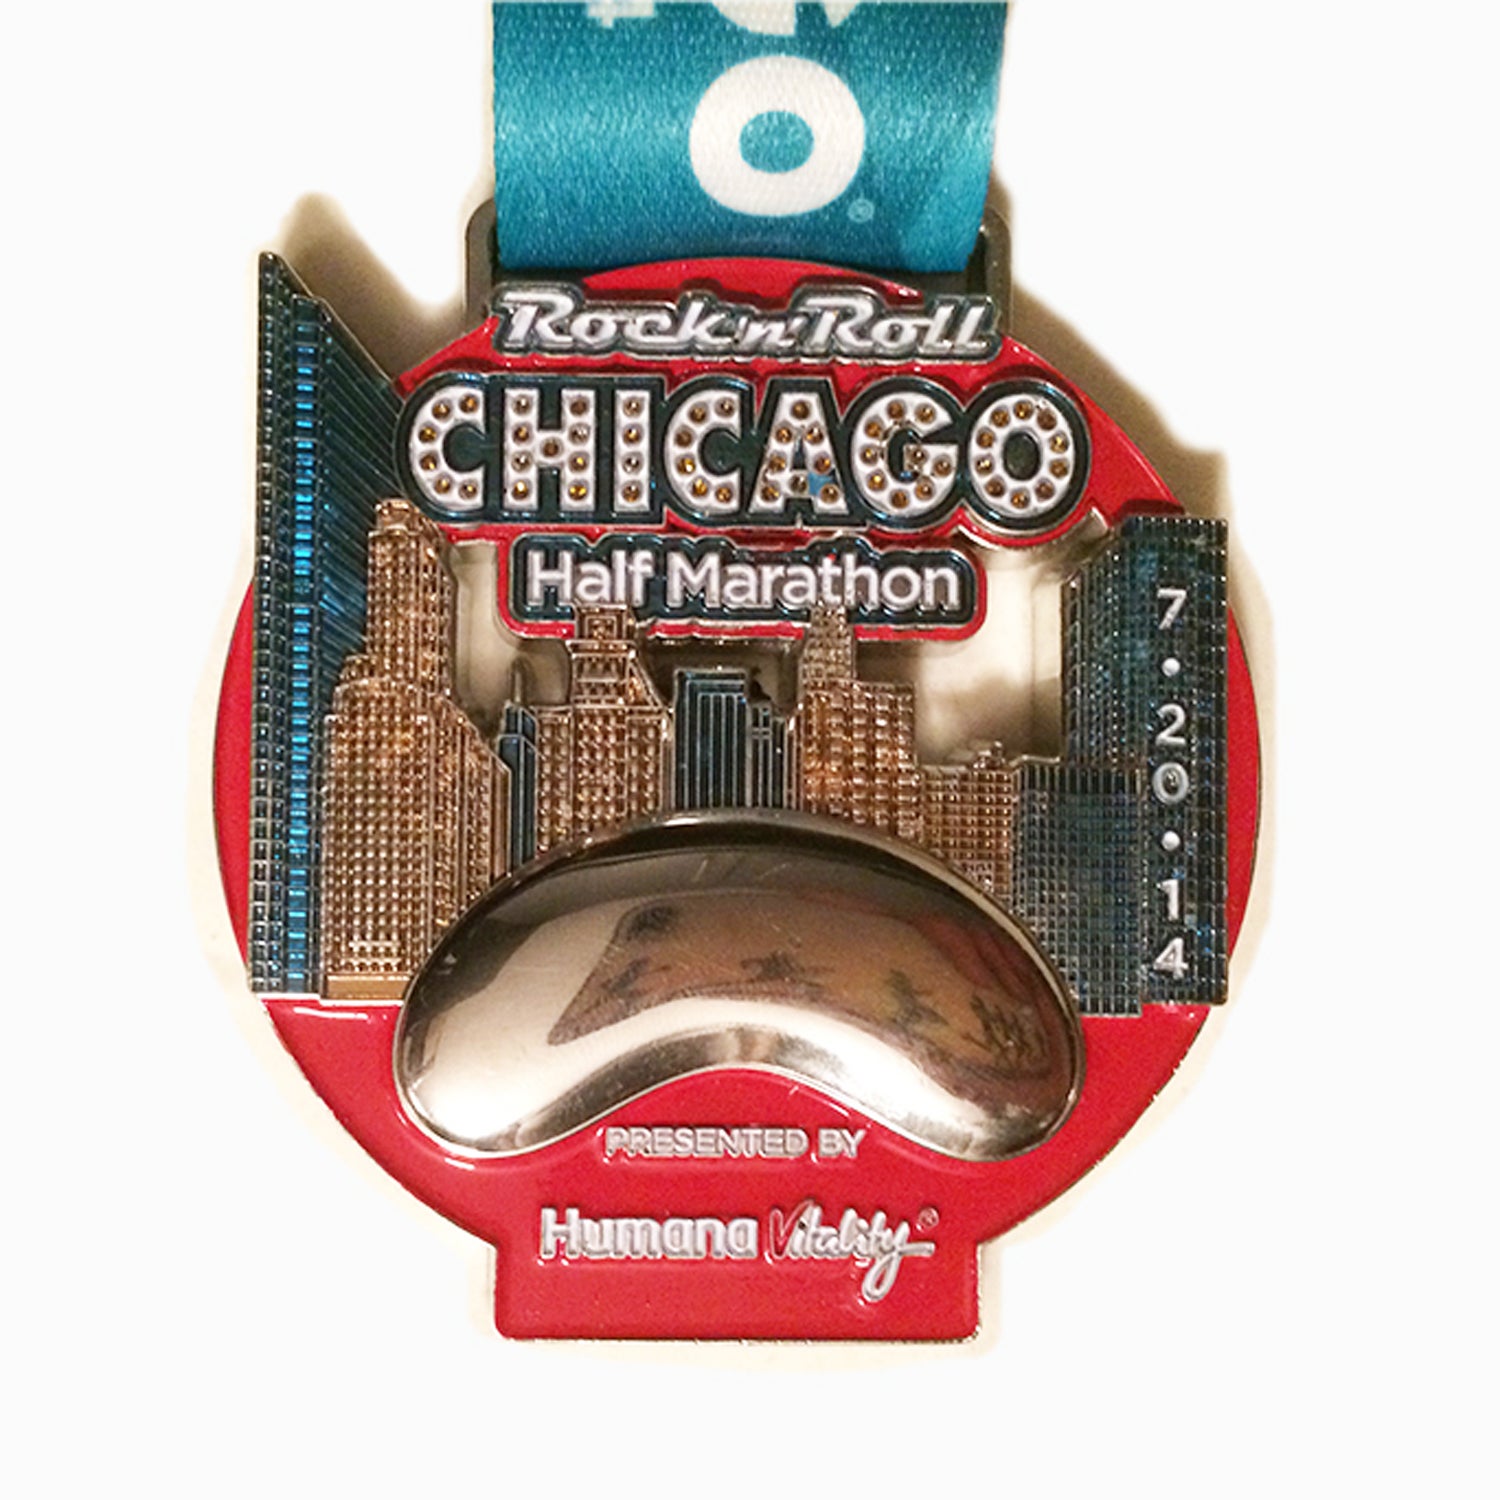 Solera: Advertisers are always quick to feature the Willis and Hancock Towers on promotional materials, so it’s refreshing to see other monuments make the cut. The 2014 edition of the city’s largest half marathon featured Cloud Gate, more affectionately known as the Bean, and a short strip of Michigan Avenue.